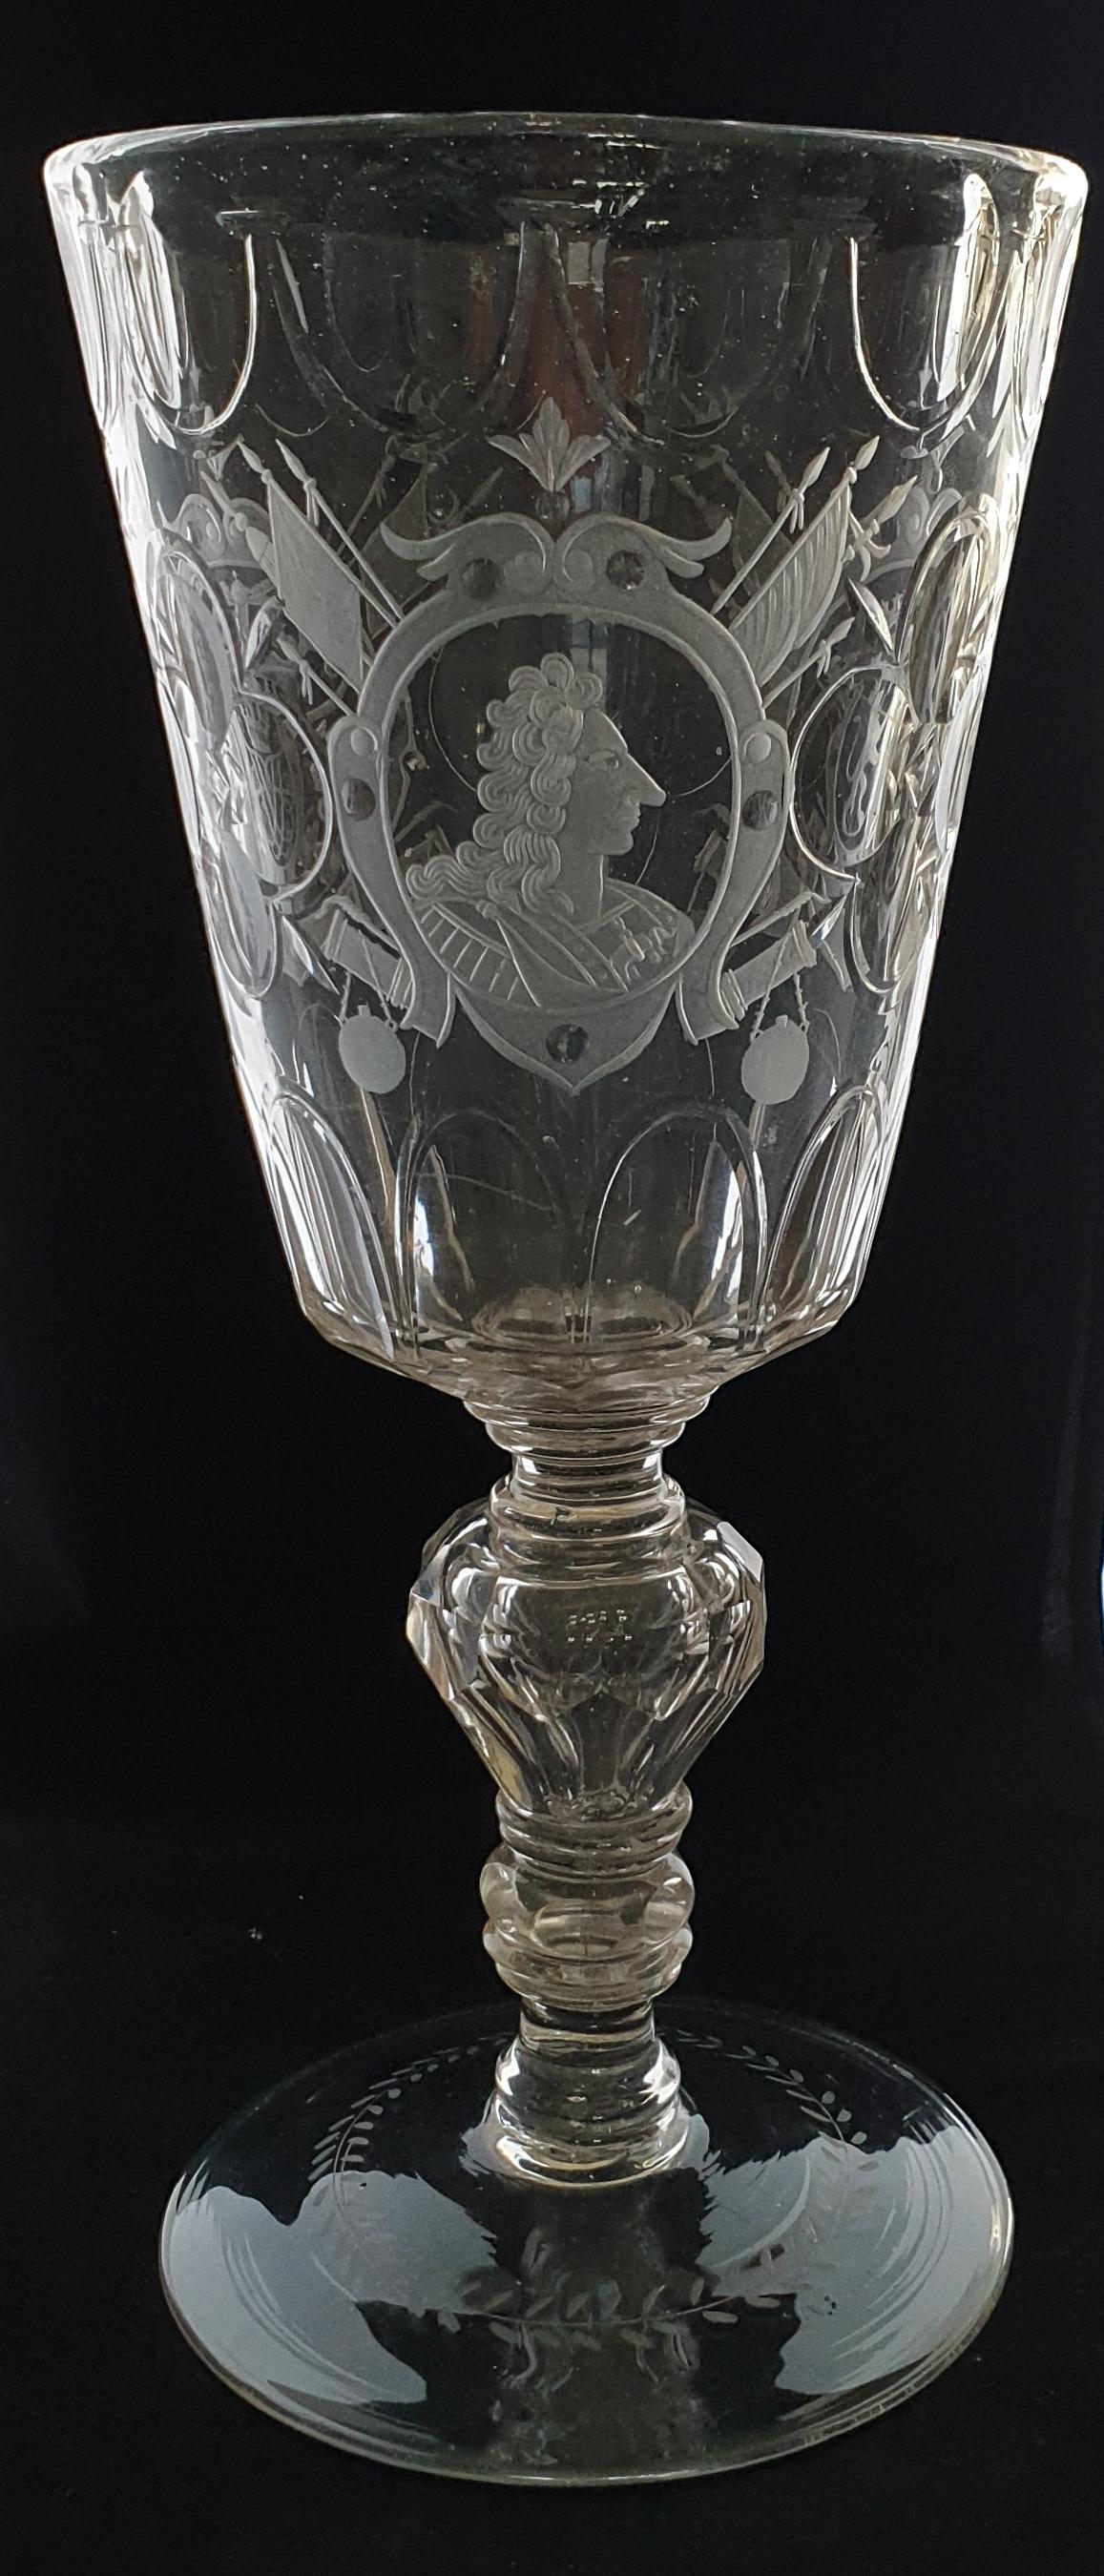 A fabulous, enormous piece of glass, engraved with a portrait of King Frederick IV of Denmark & Norway, his monogram and arms. Possibly Buttlarschen or Altmeunden.